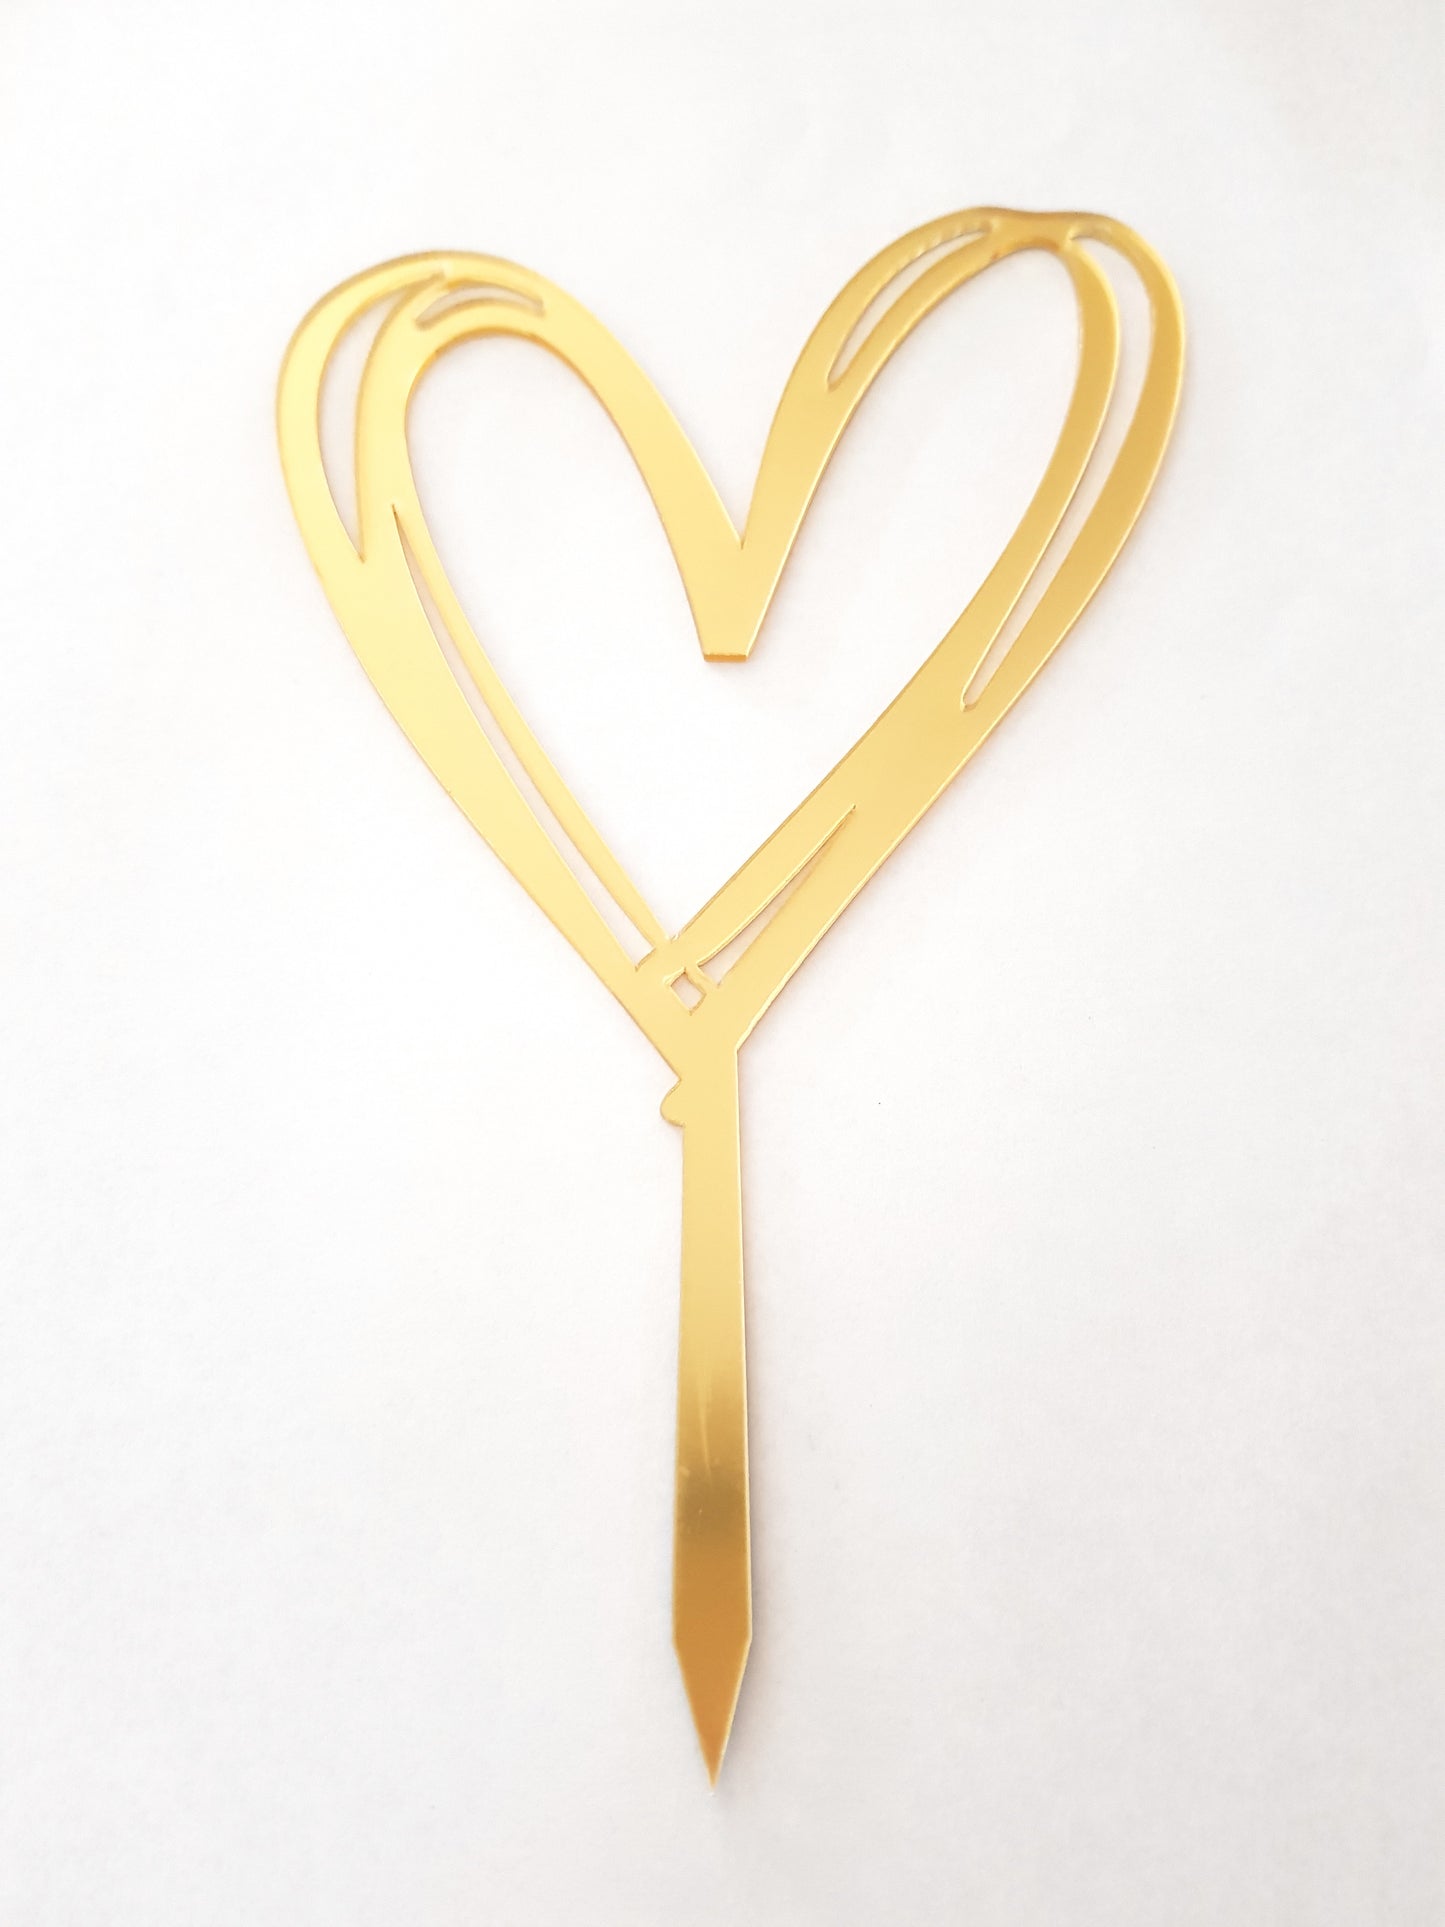 Hand-Drawn Heart Acrylic Cake Topper | Valentine's Day